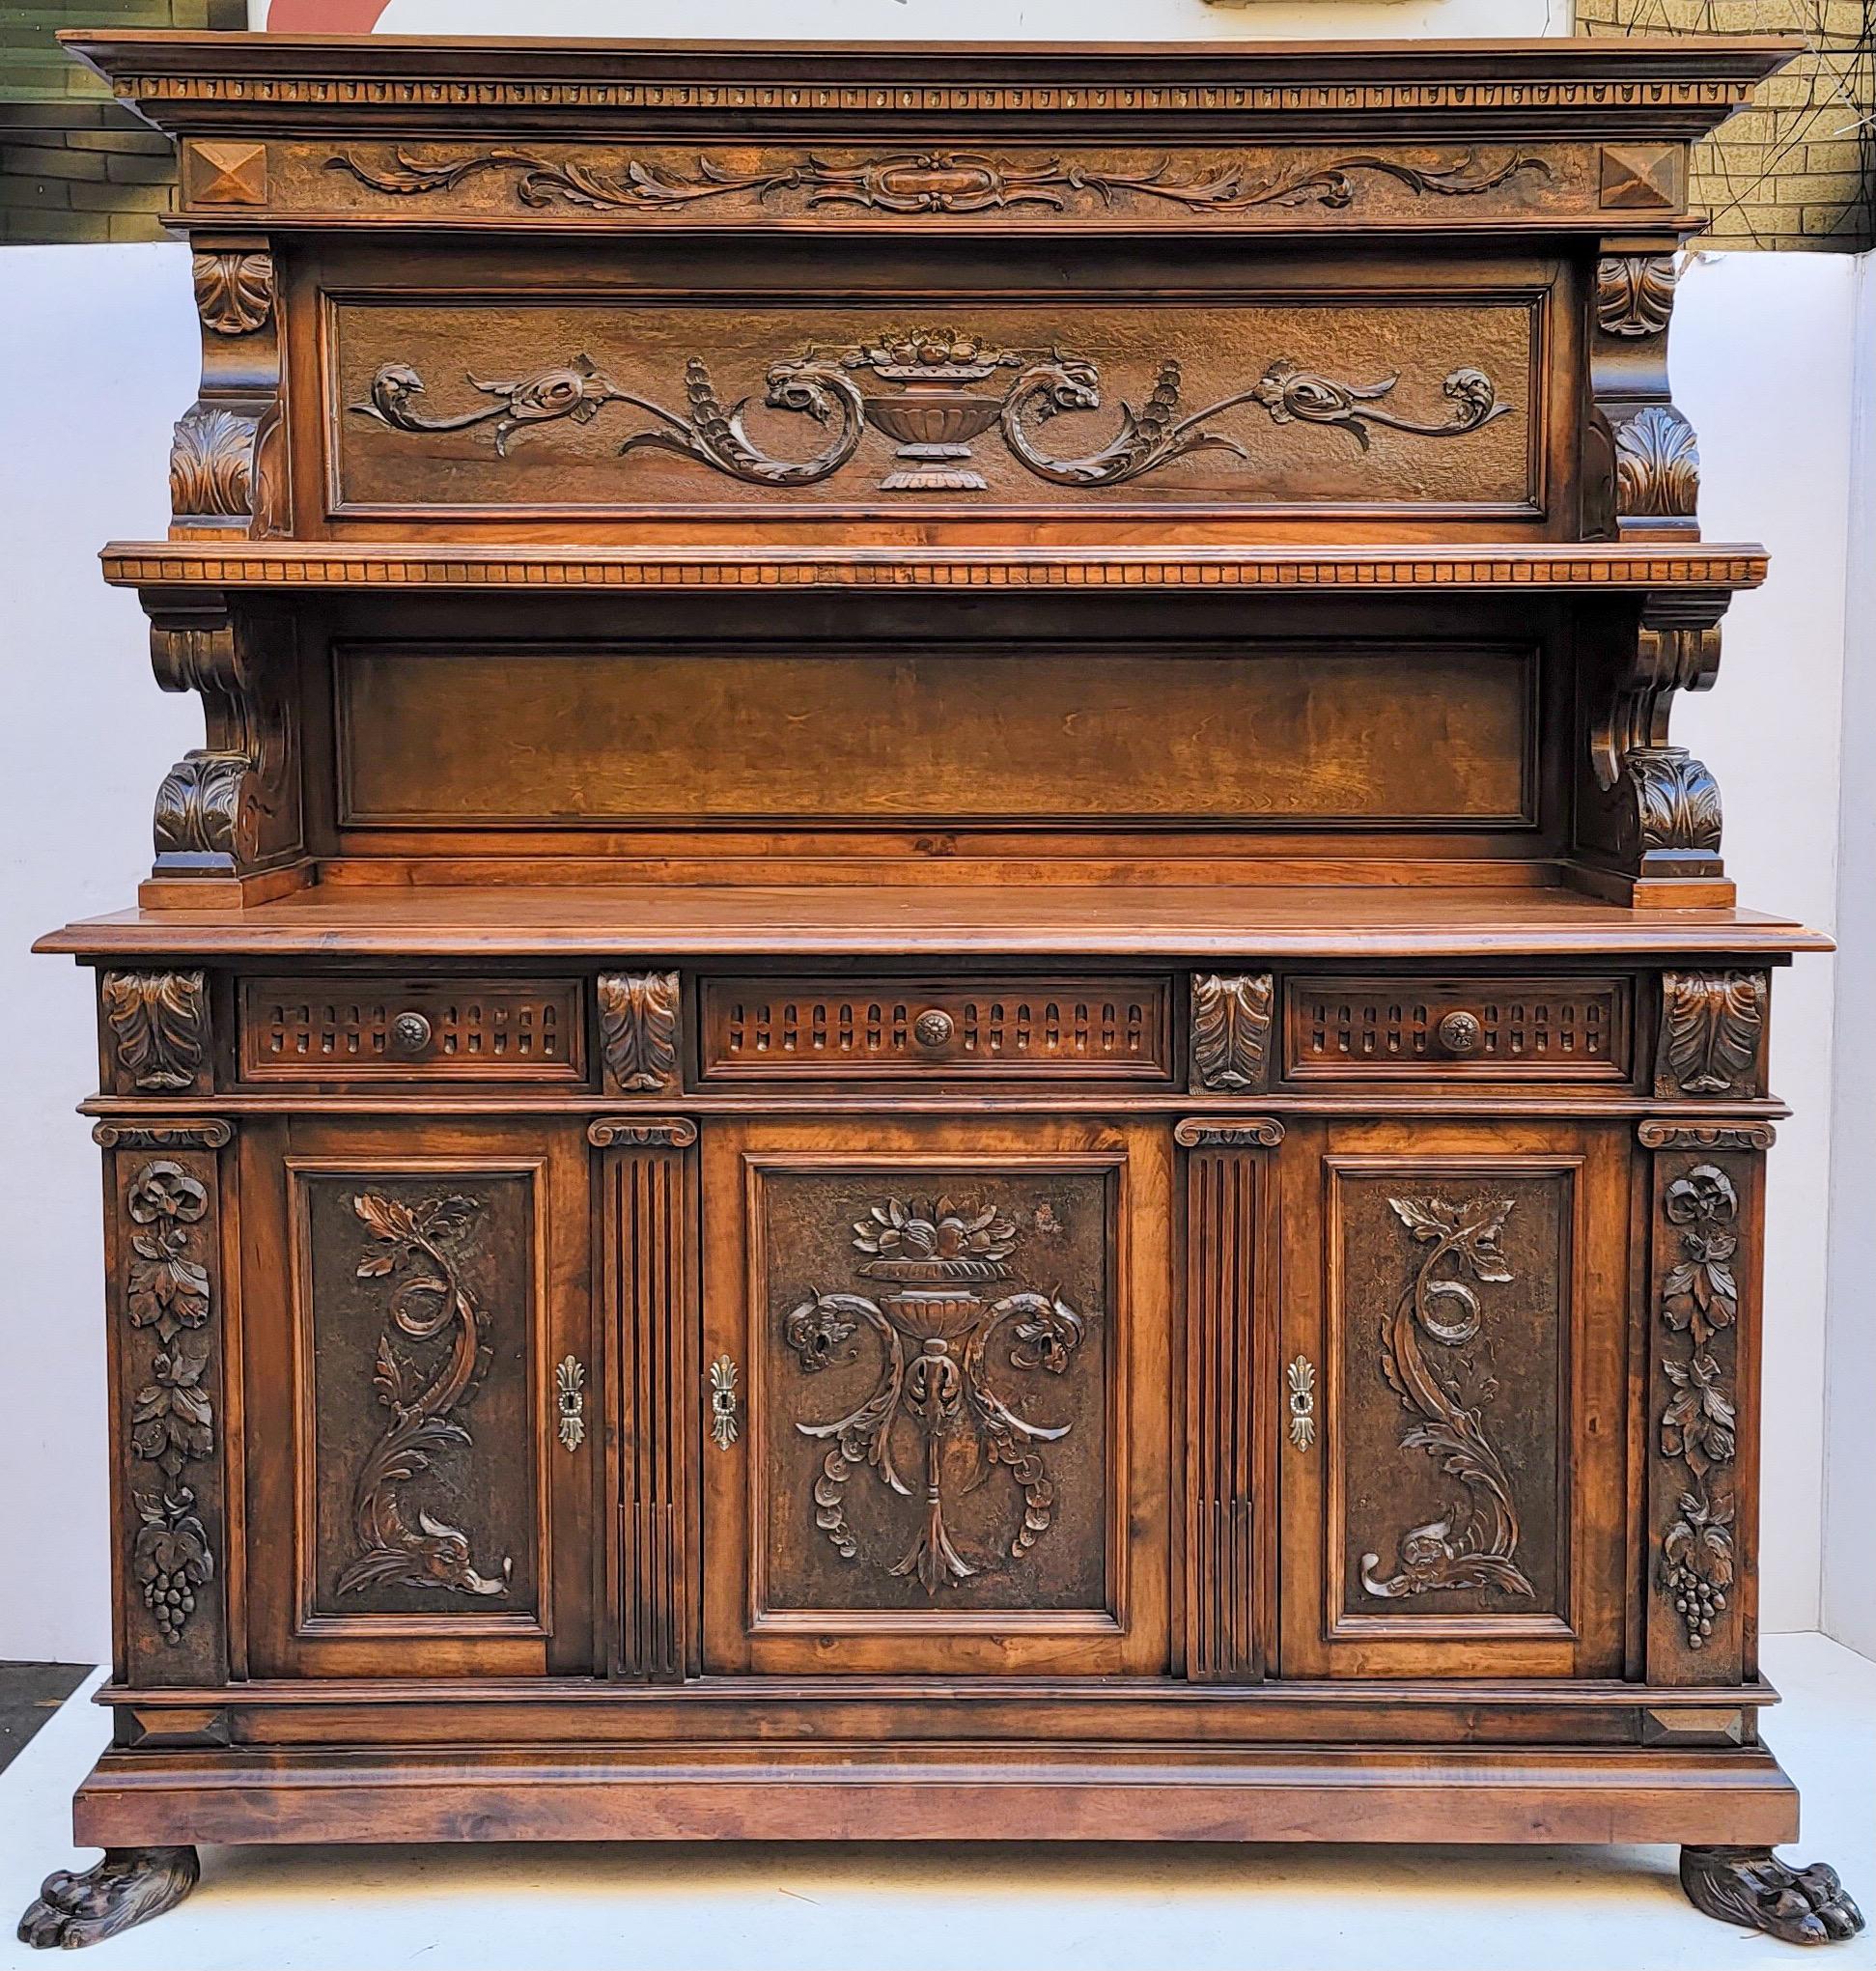 Neoclassical Revival Neo-Classical Revival Carved Walnut Italian Cabinet / Cupboard, c. 1880